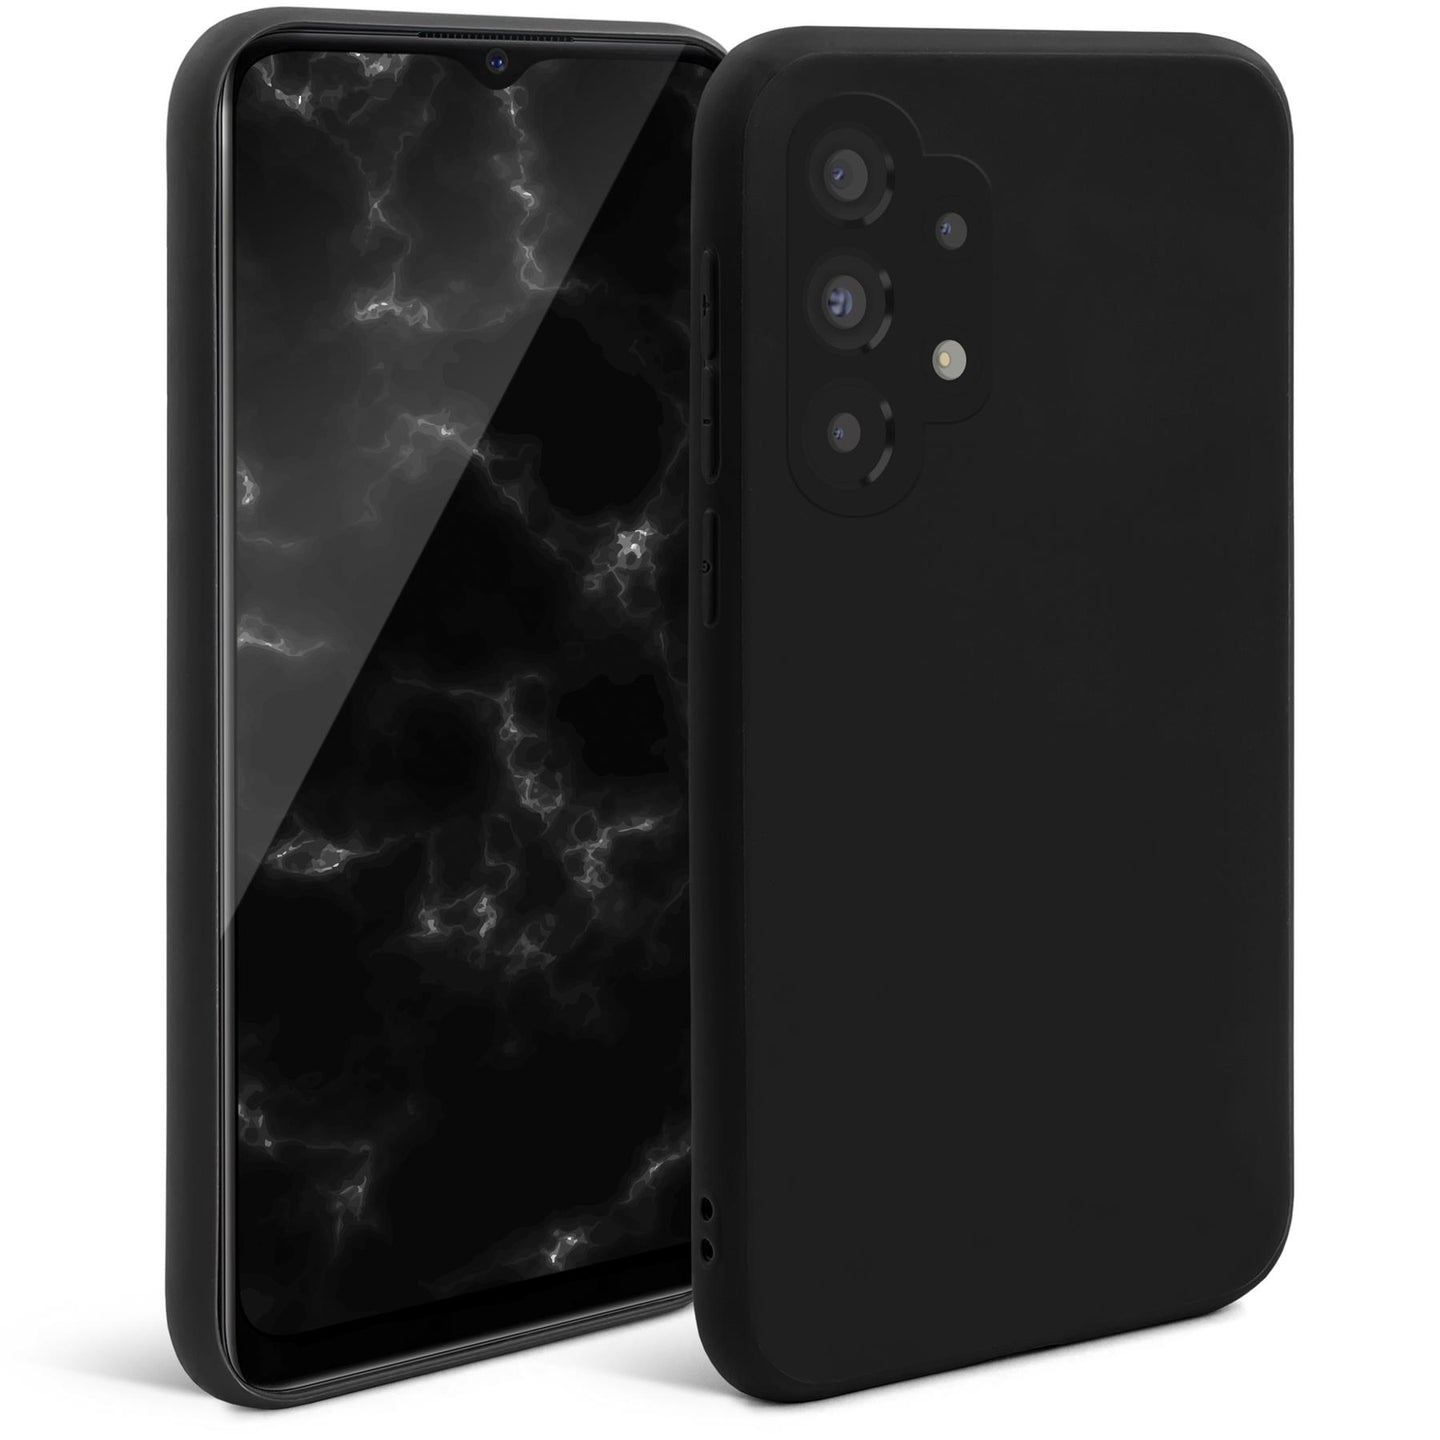 Moozy Minimalist Series Silicone Case for Samsung A32 5G, Black - Matte Finish Lightweight Mobile Phone Case Slim Soft Protective TPU Cover with Matte Surface